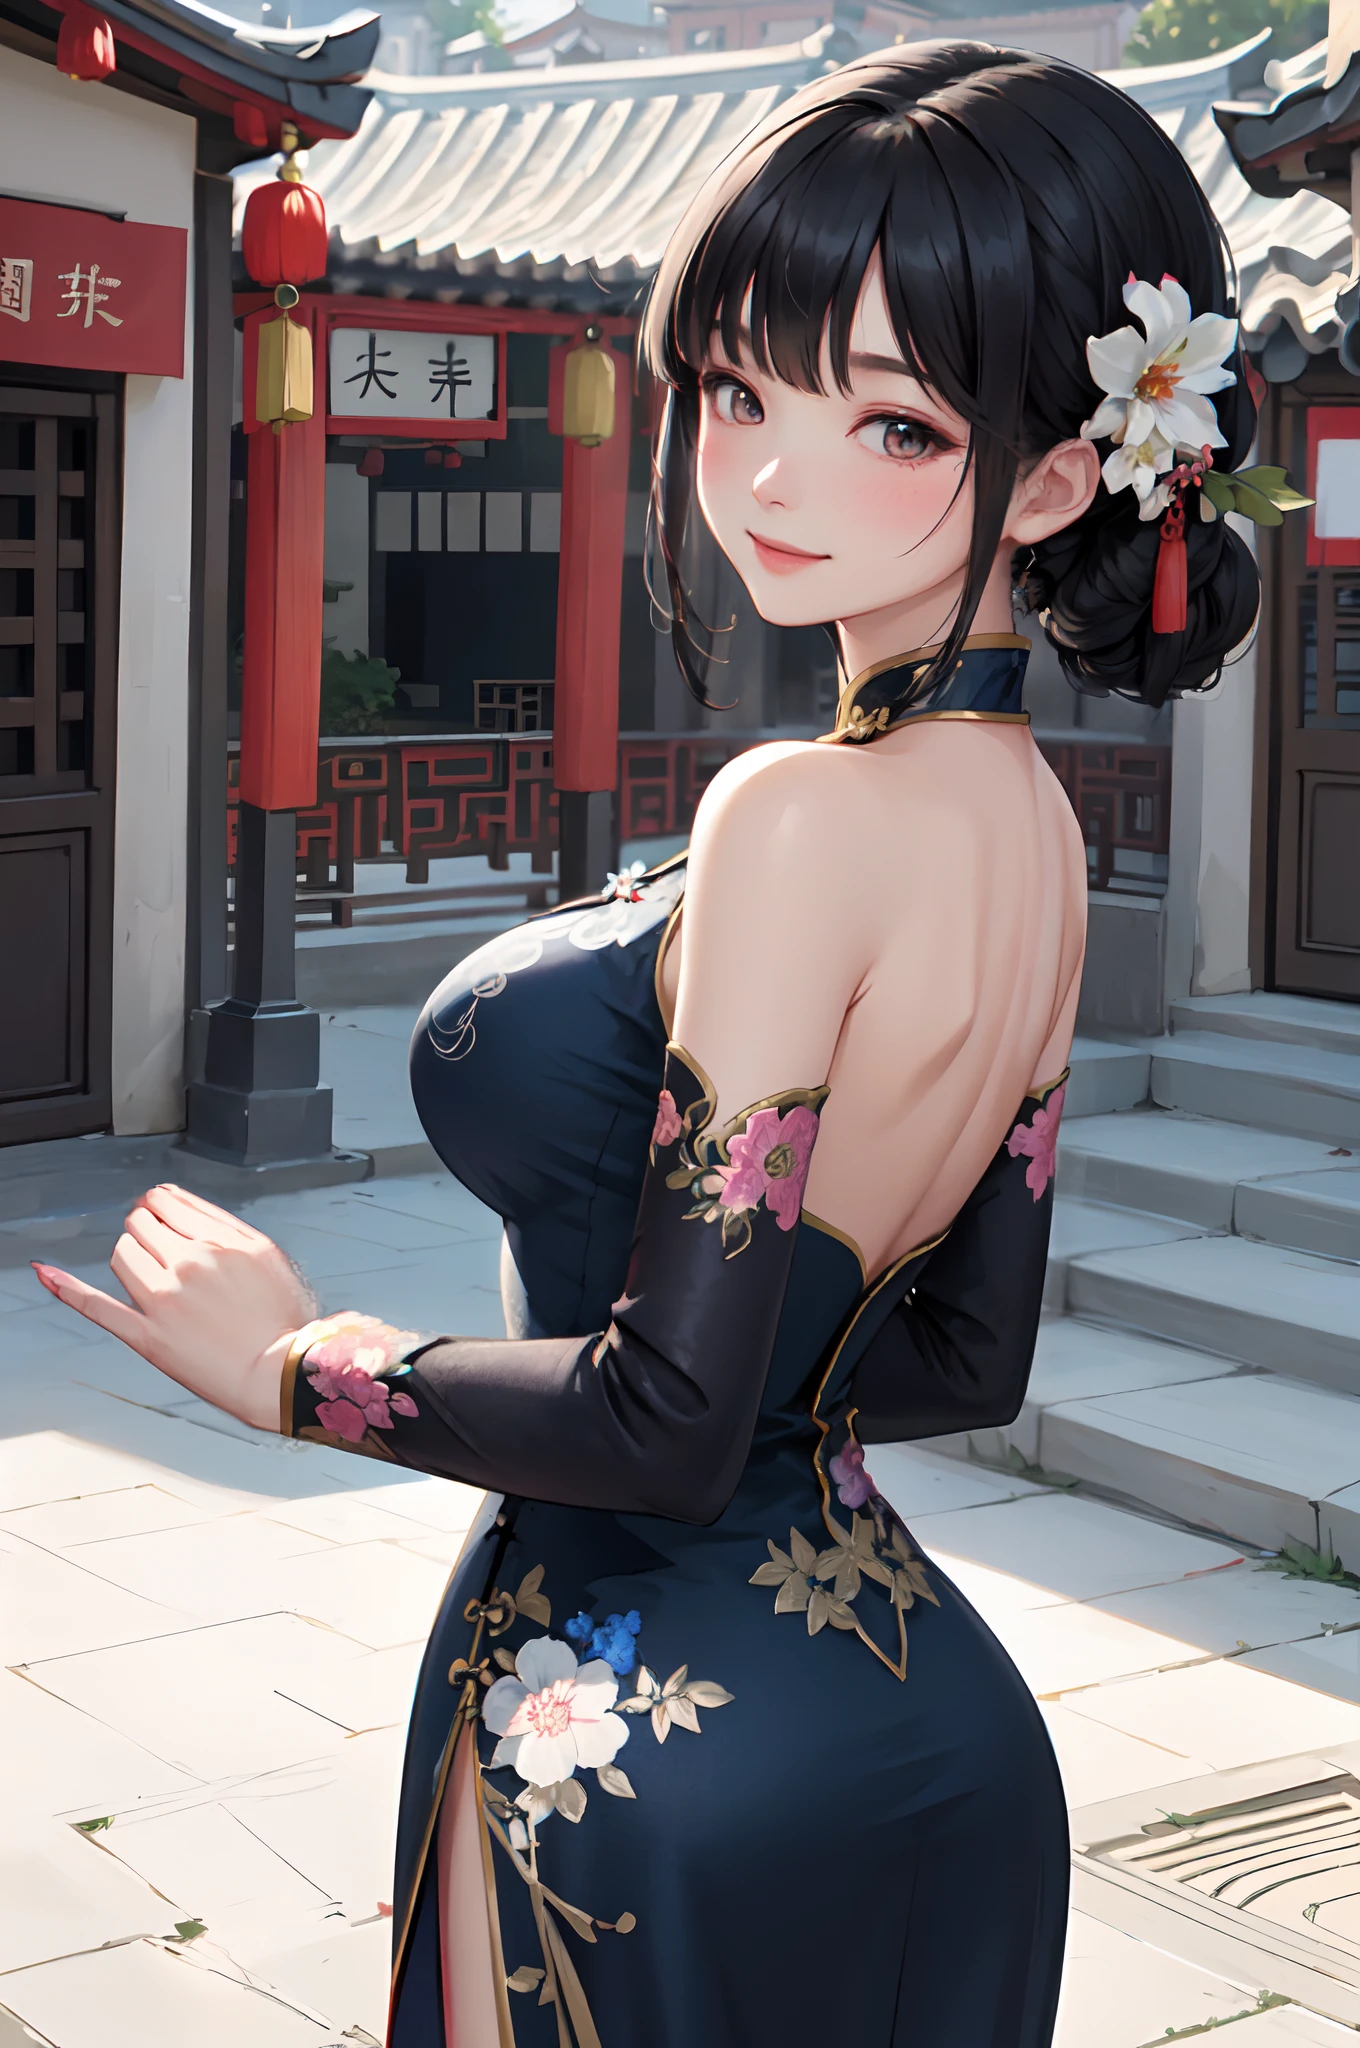 1lady solo, /(Chinese dress with floral embroidery/) deep blue dress, mature female, /(black hair/) bangs, blush kind smile, (masterpiece best quality:1.2) delicate illustration ultra-detailed, large breasts BREAK /(traditional townscape in China/), outdoors, detailed back ground